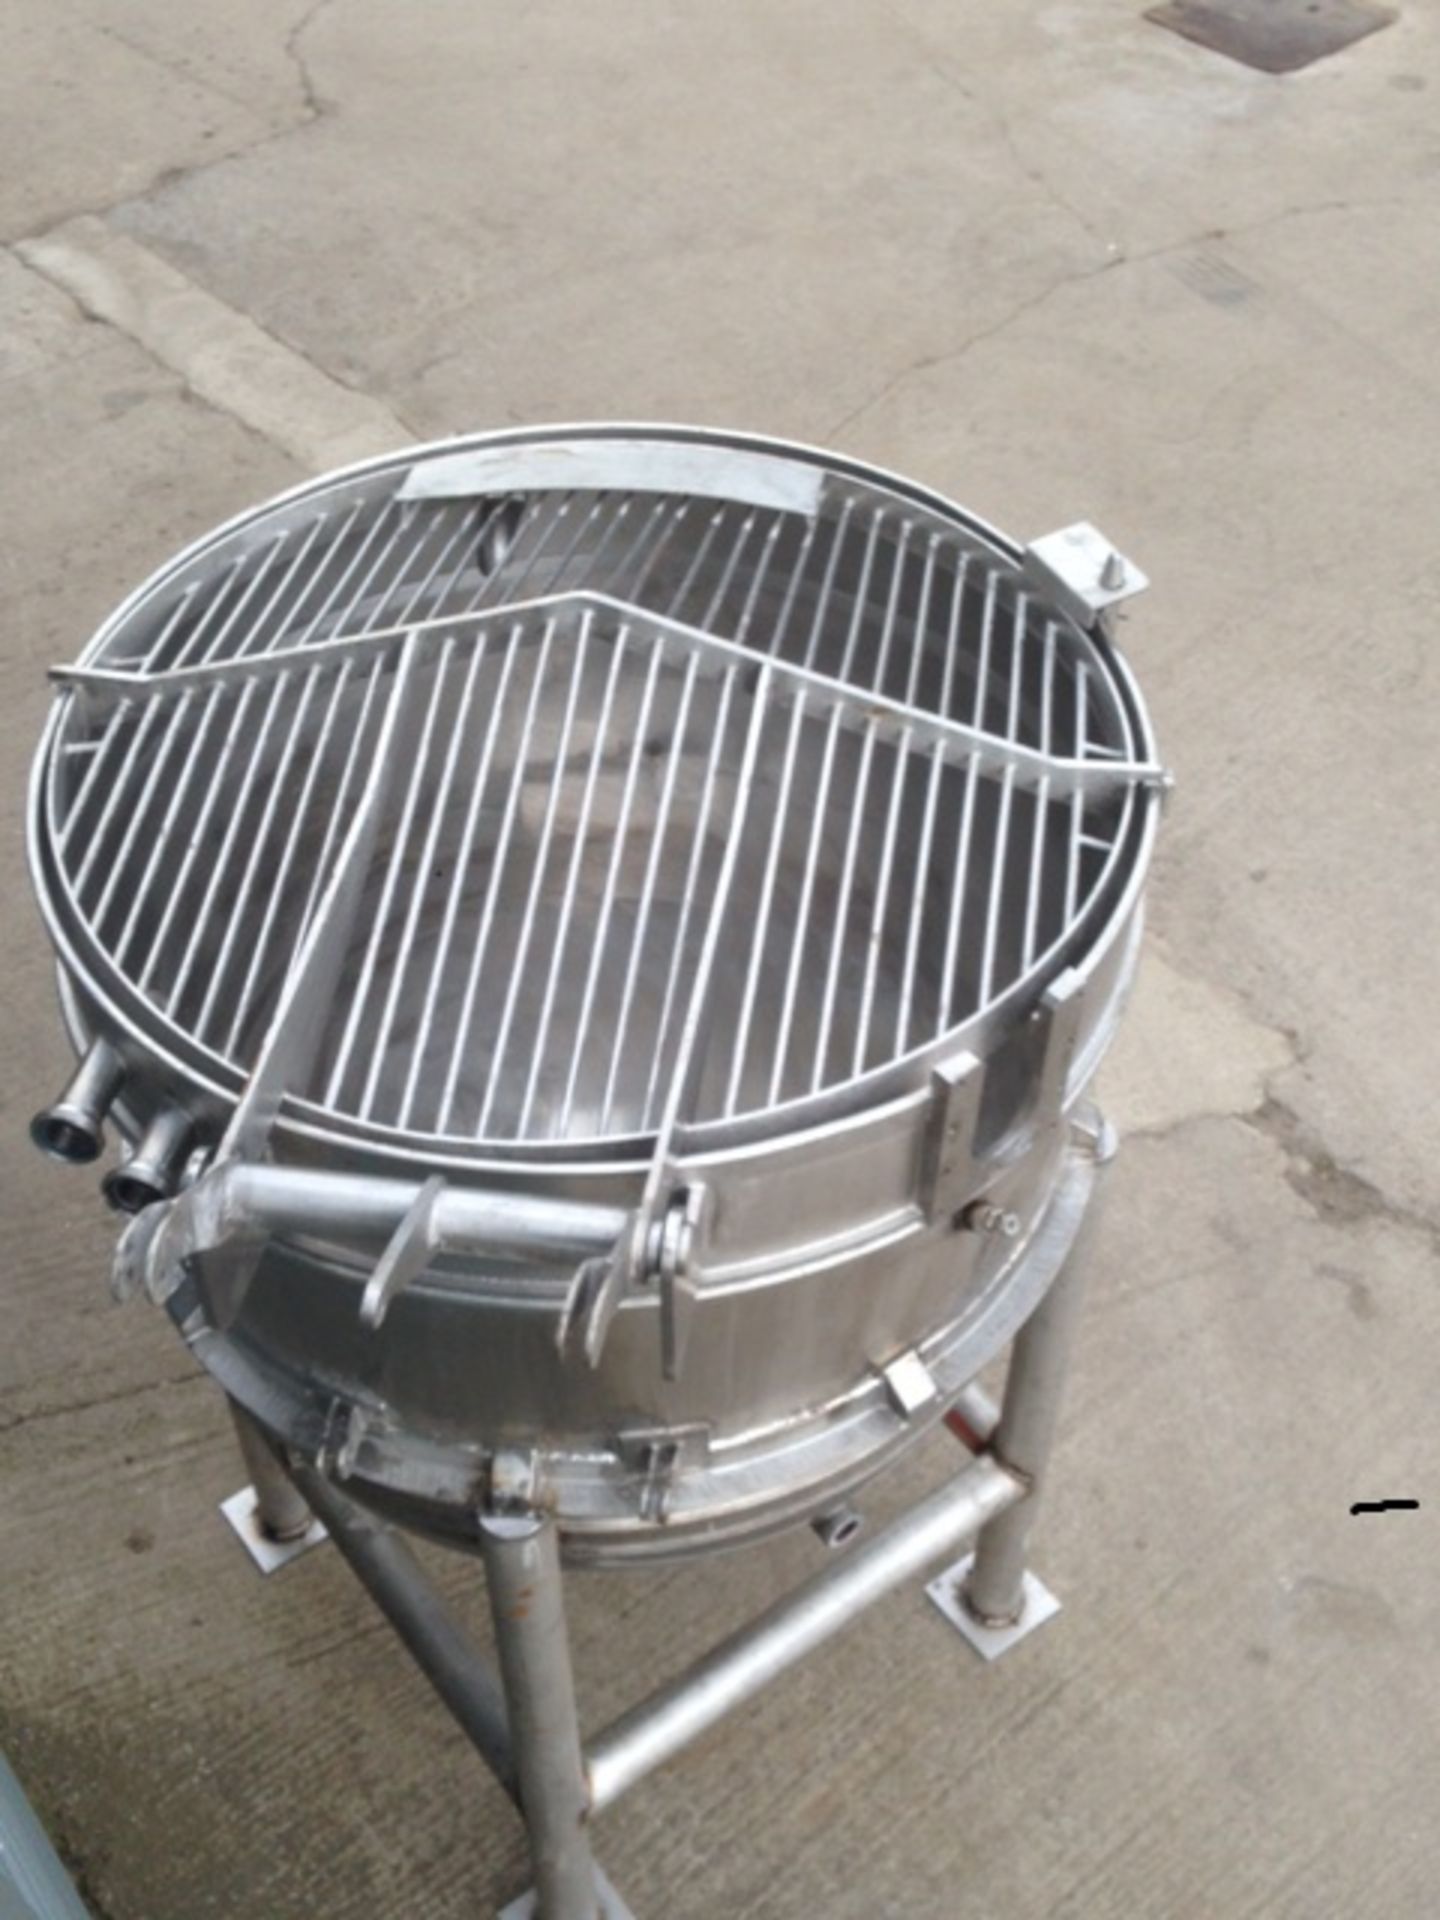 Stainless Steel A.P.V. Scraped Wall Pan